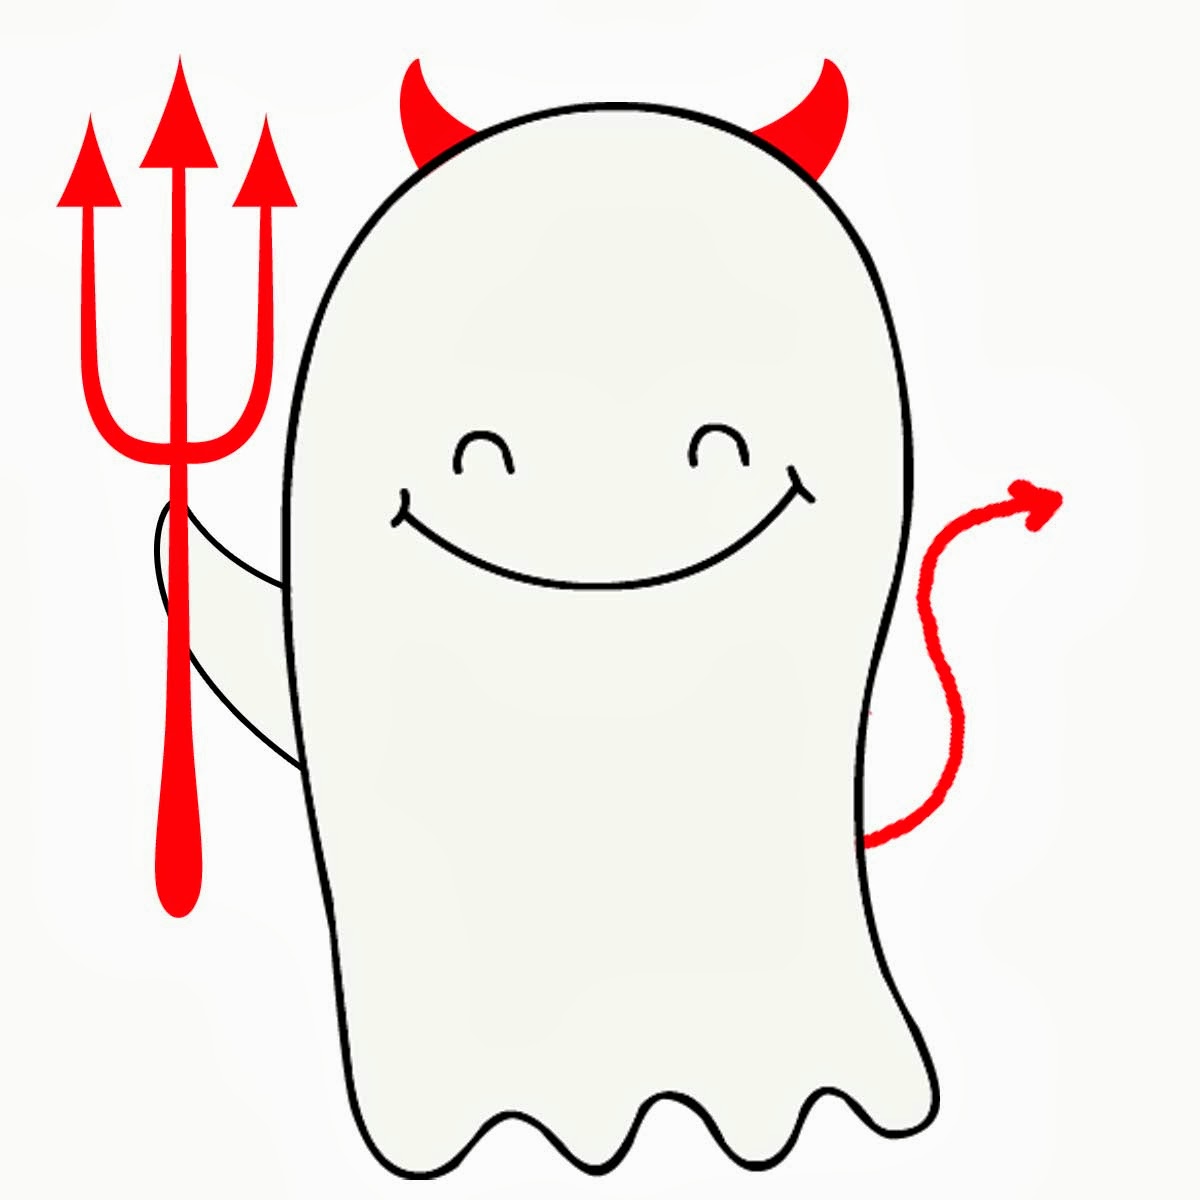 Printable Halloween Ghosts by Carissa Miss - Happiness is Homemade